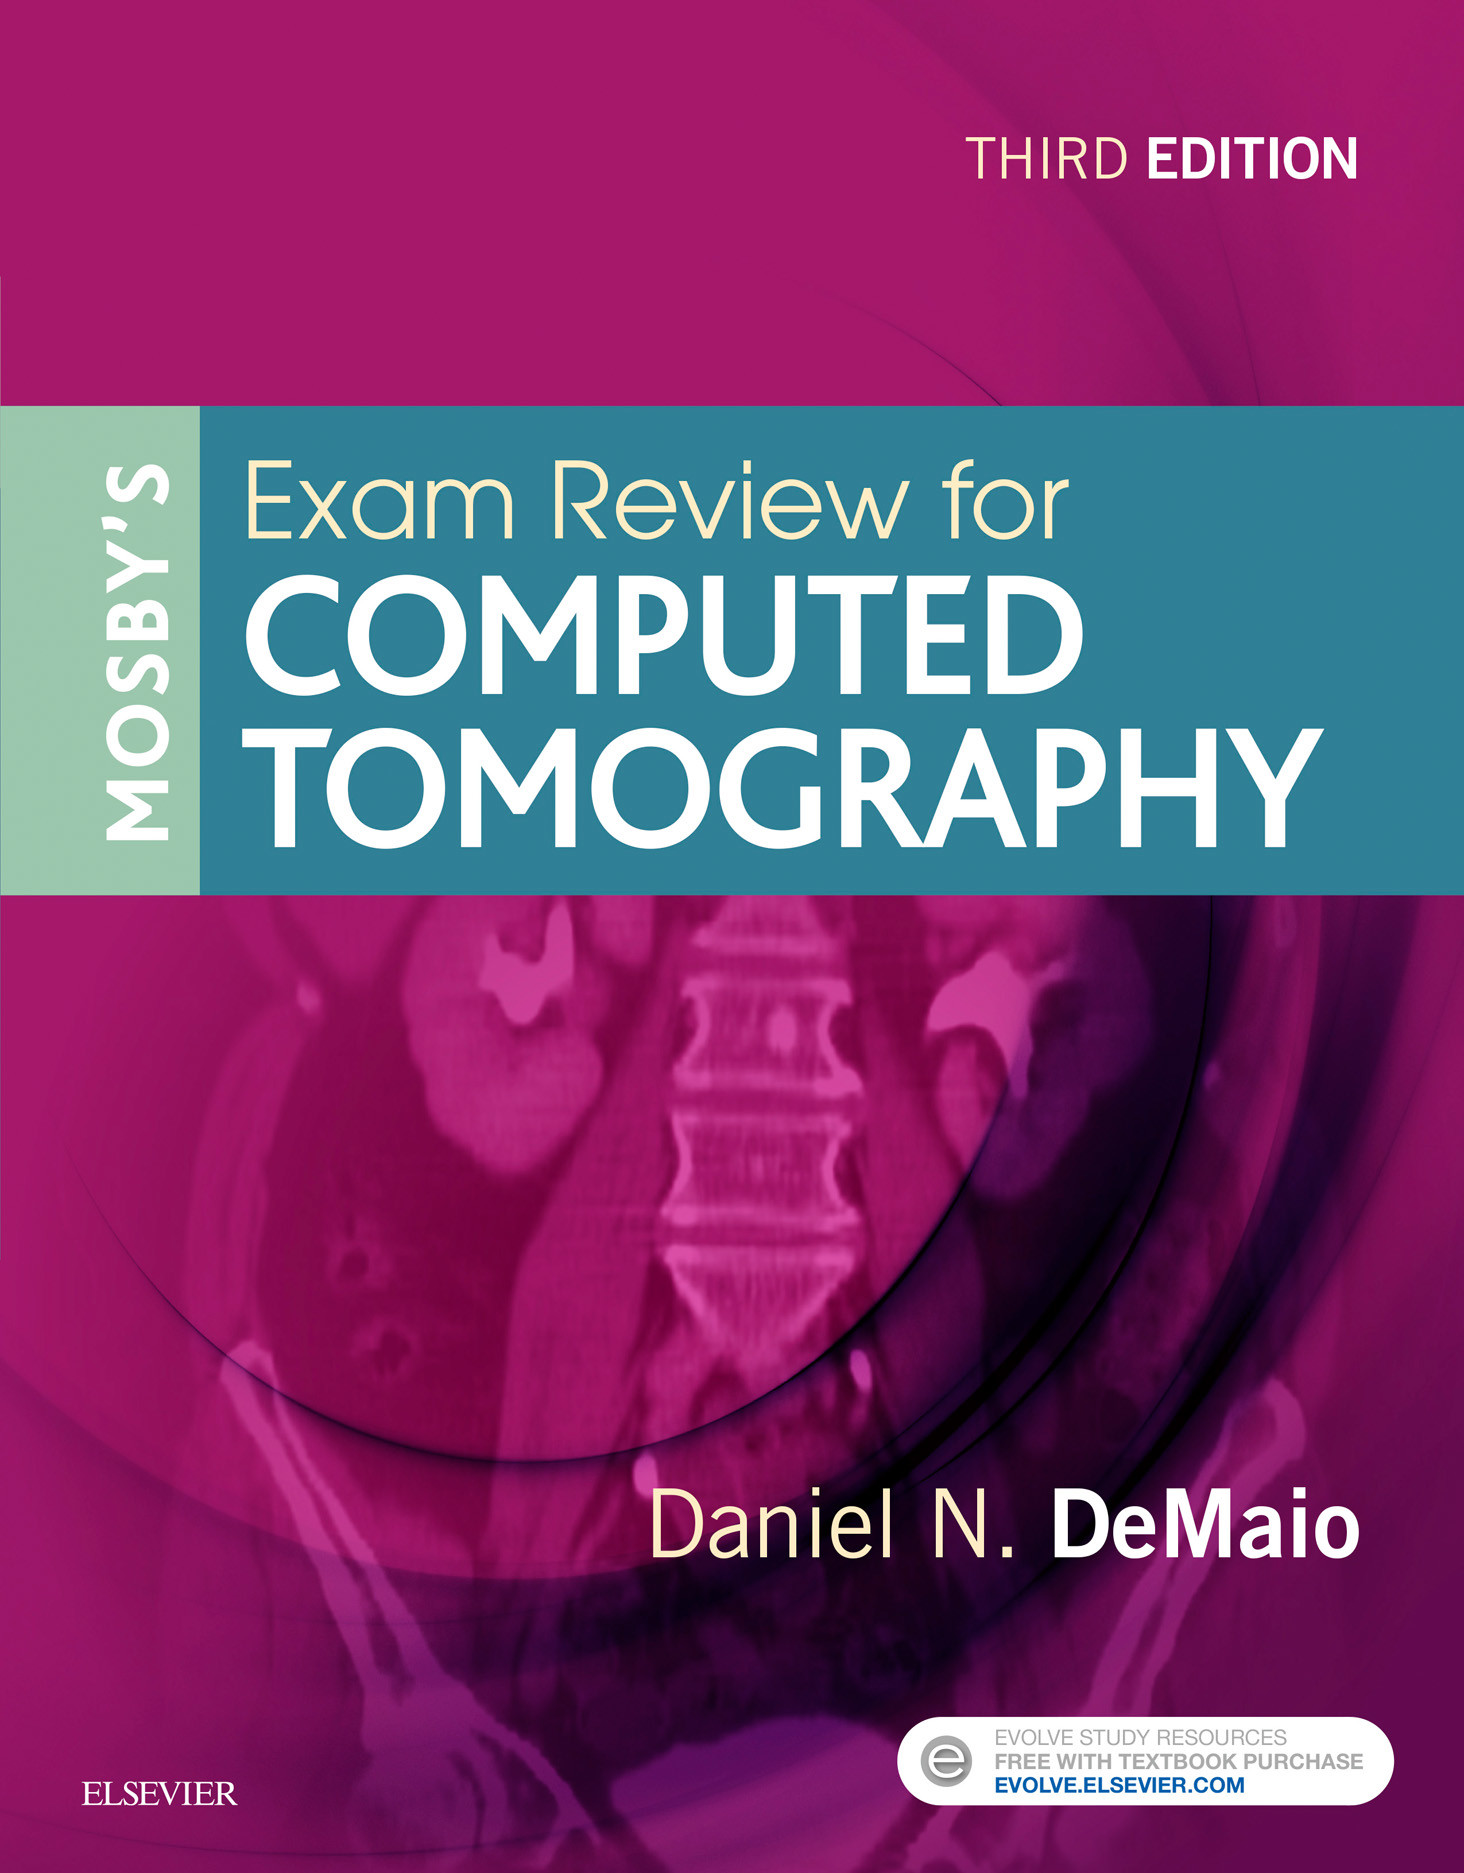 Mosby's Exam Review for Computed Tomography - E-Book